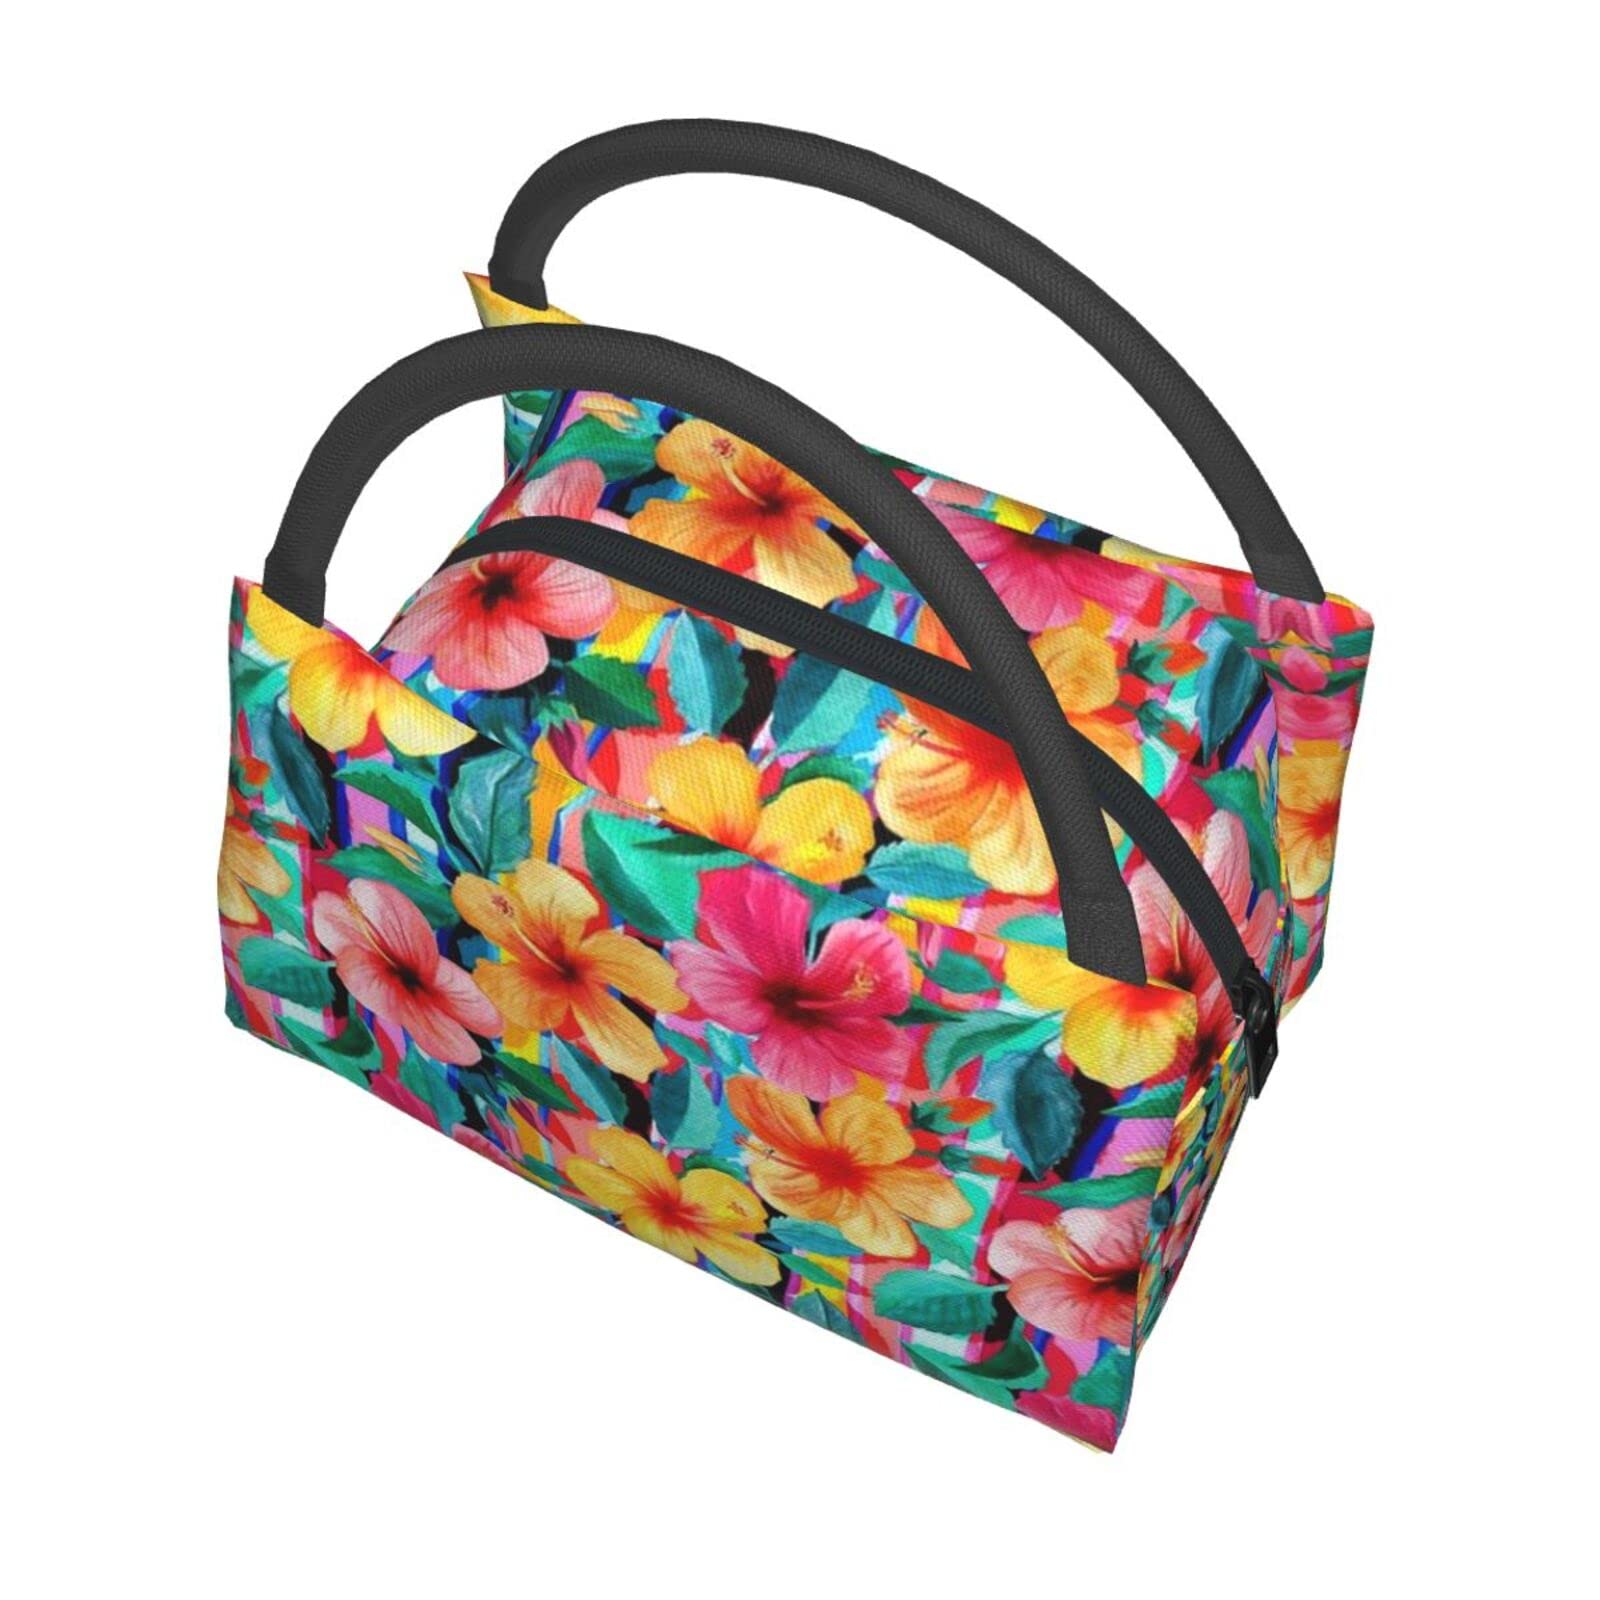 ASYG Hawaii Lunch Bag, Hawaii Tropical Floral Tote Meal Bag Lunch Holder Flower Bag for Work Outdoor Picnic